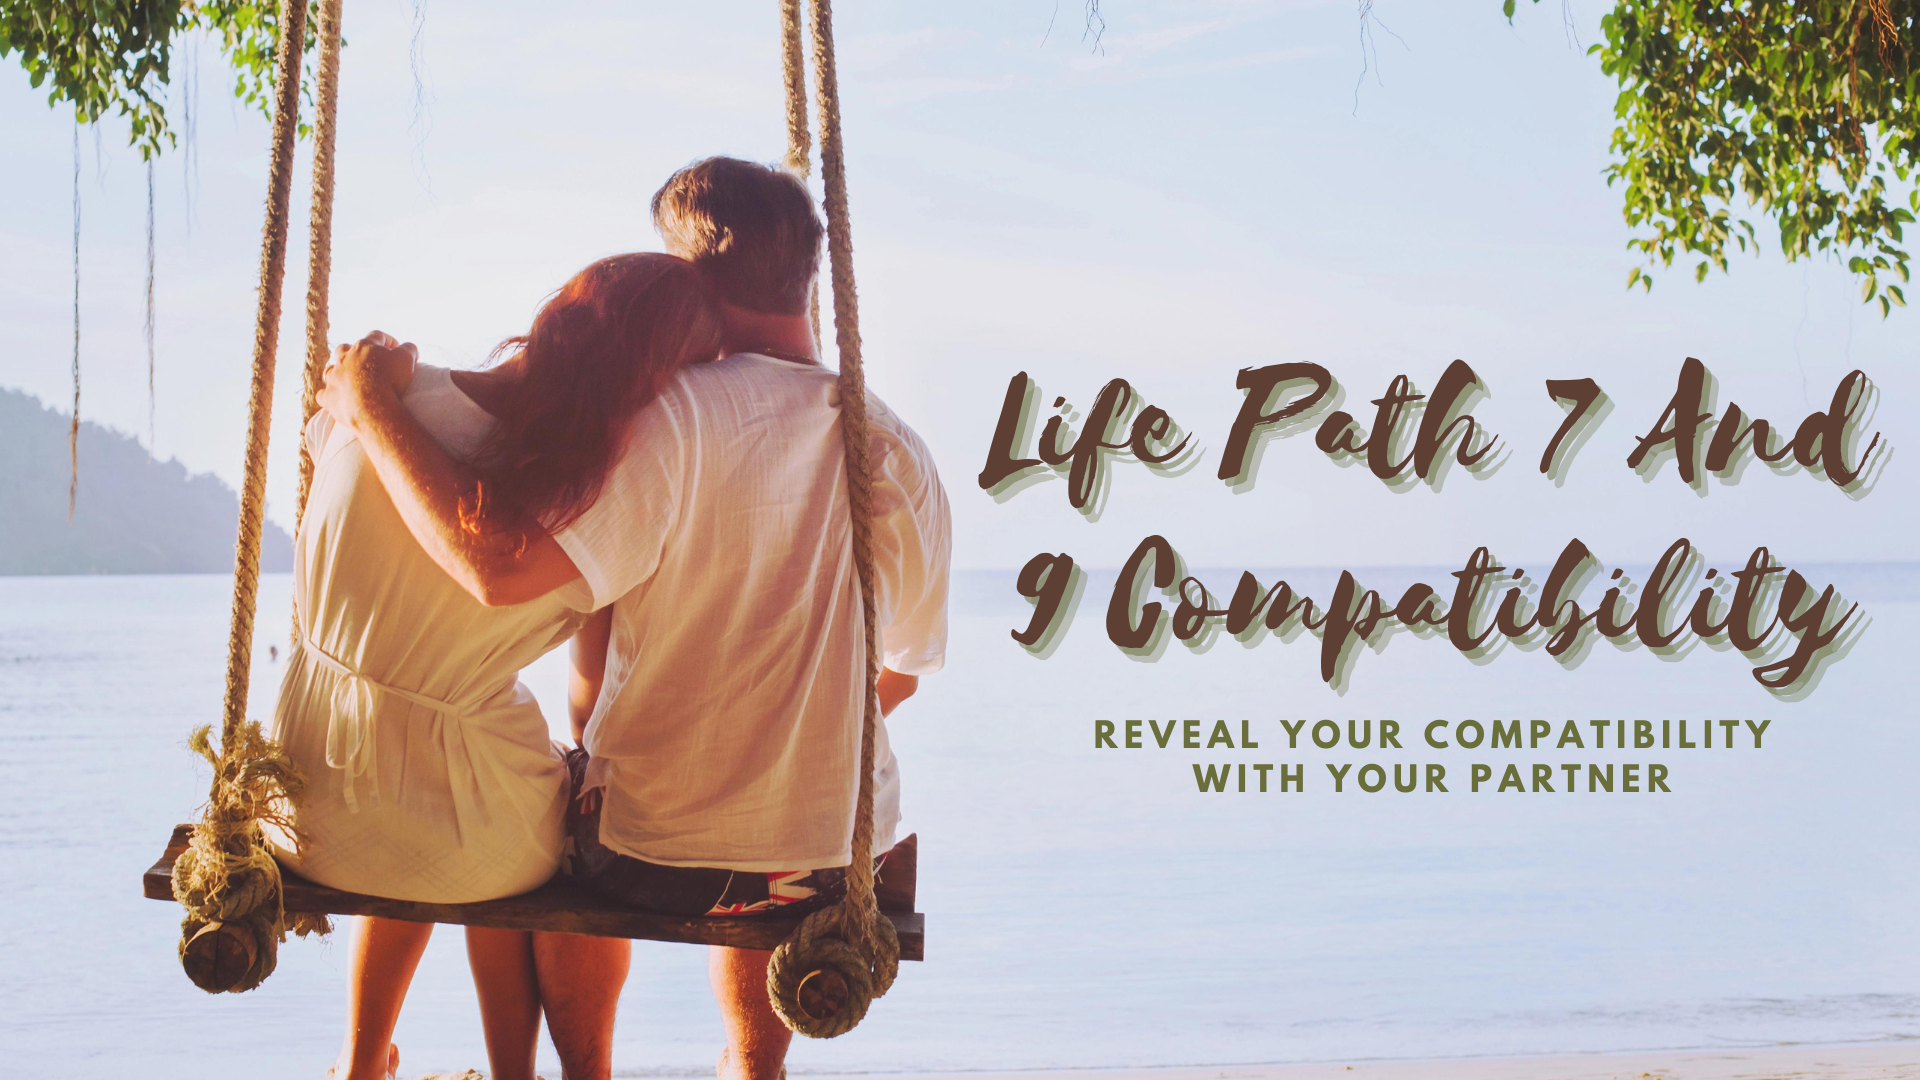 Life Path 7 And 9 Compatibility - Reveal Your Compatibility With Your Partner